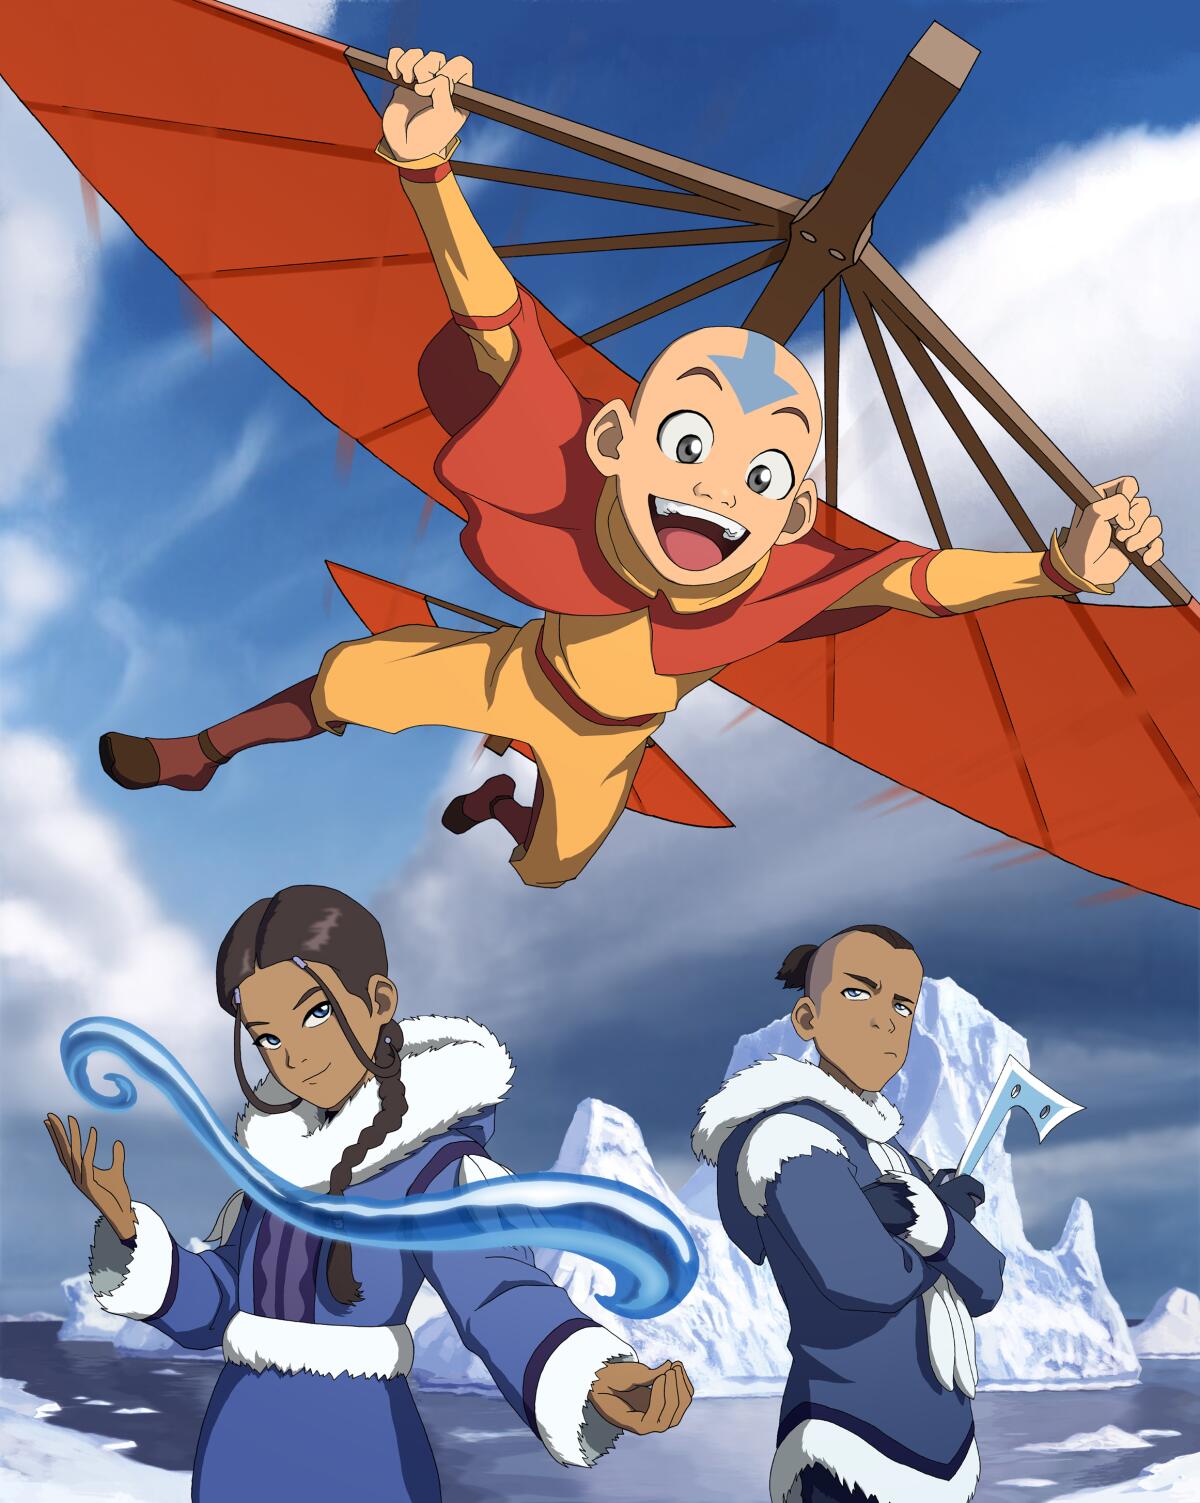 Three animated characters from "Avatar: The Last Airbender."